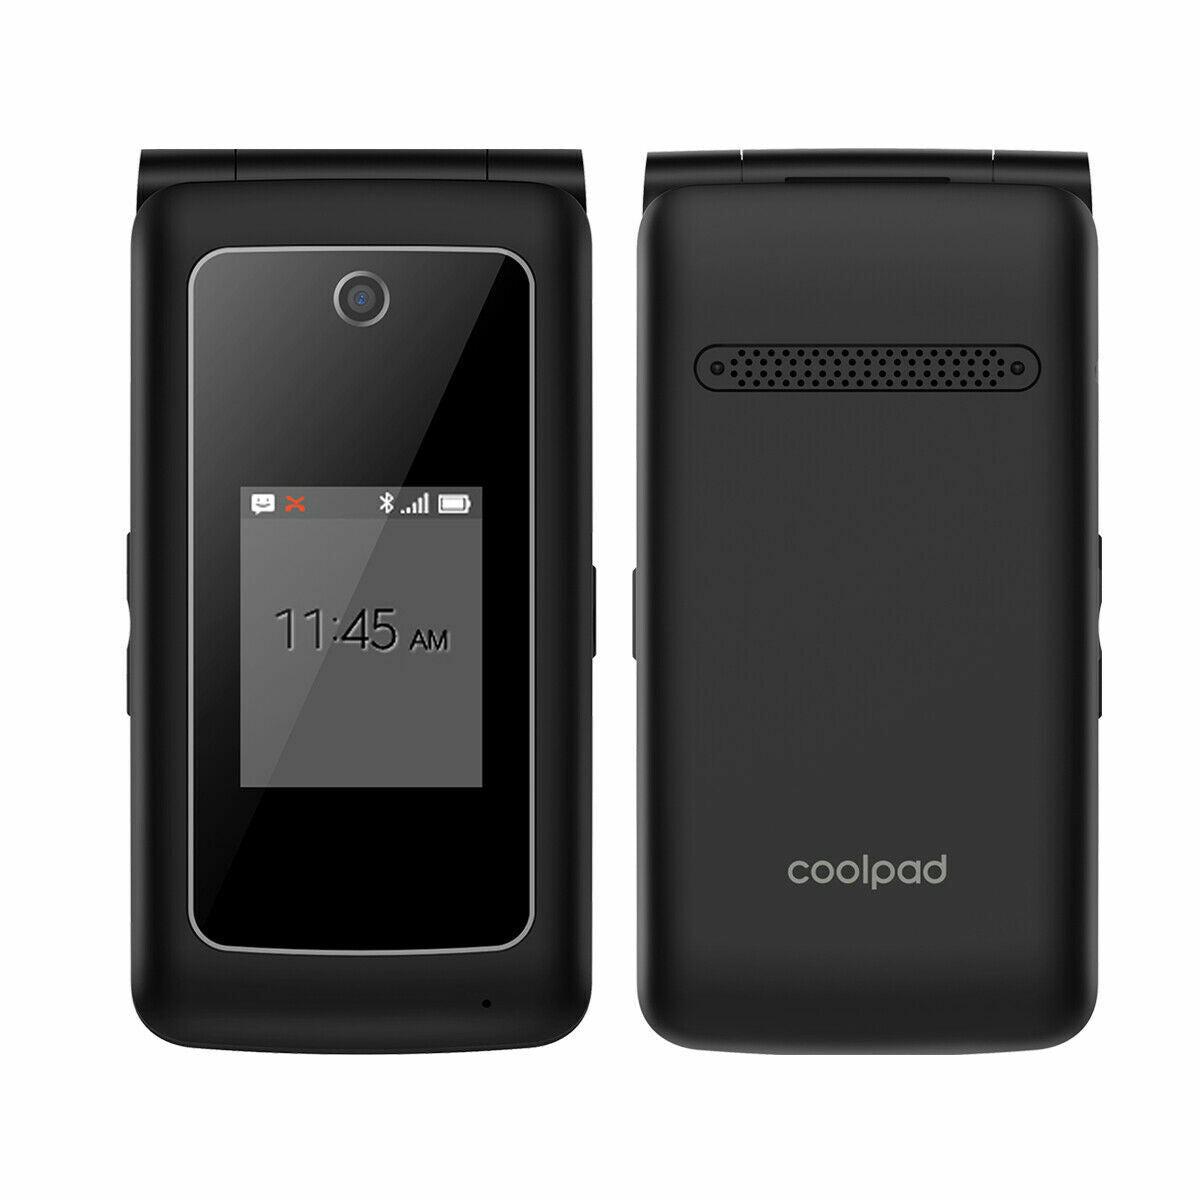 Coolpad Snap Flip Phone (Sprint Carrier Only)